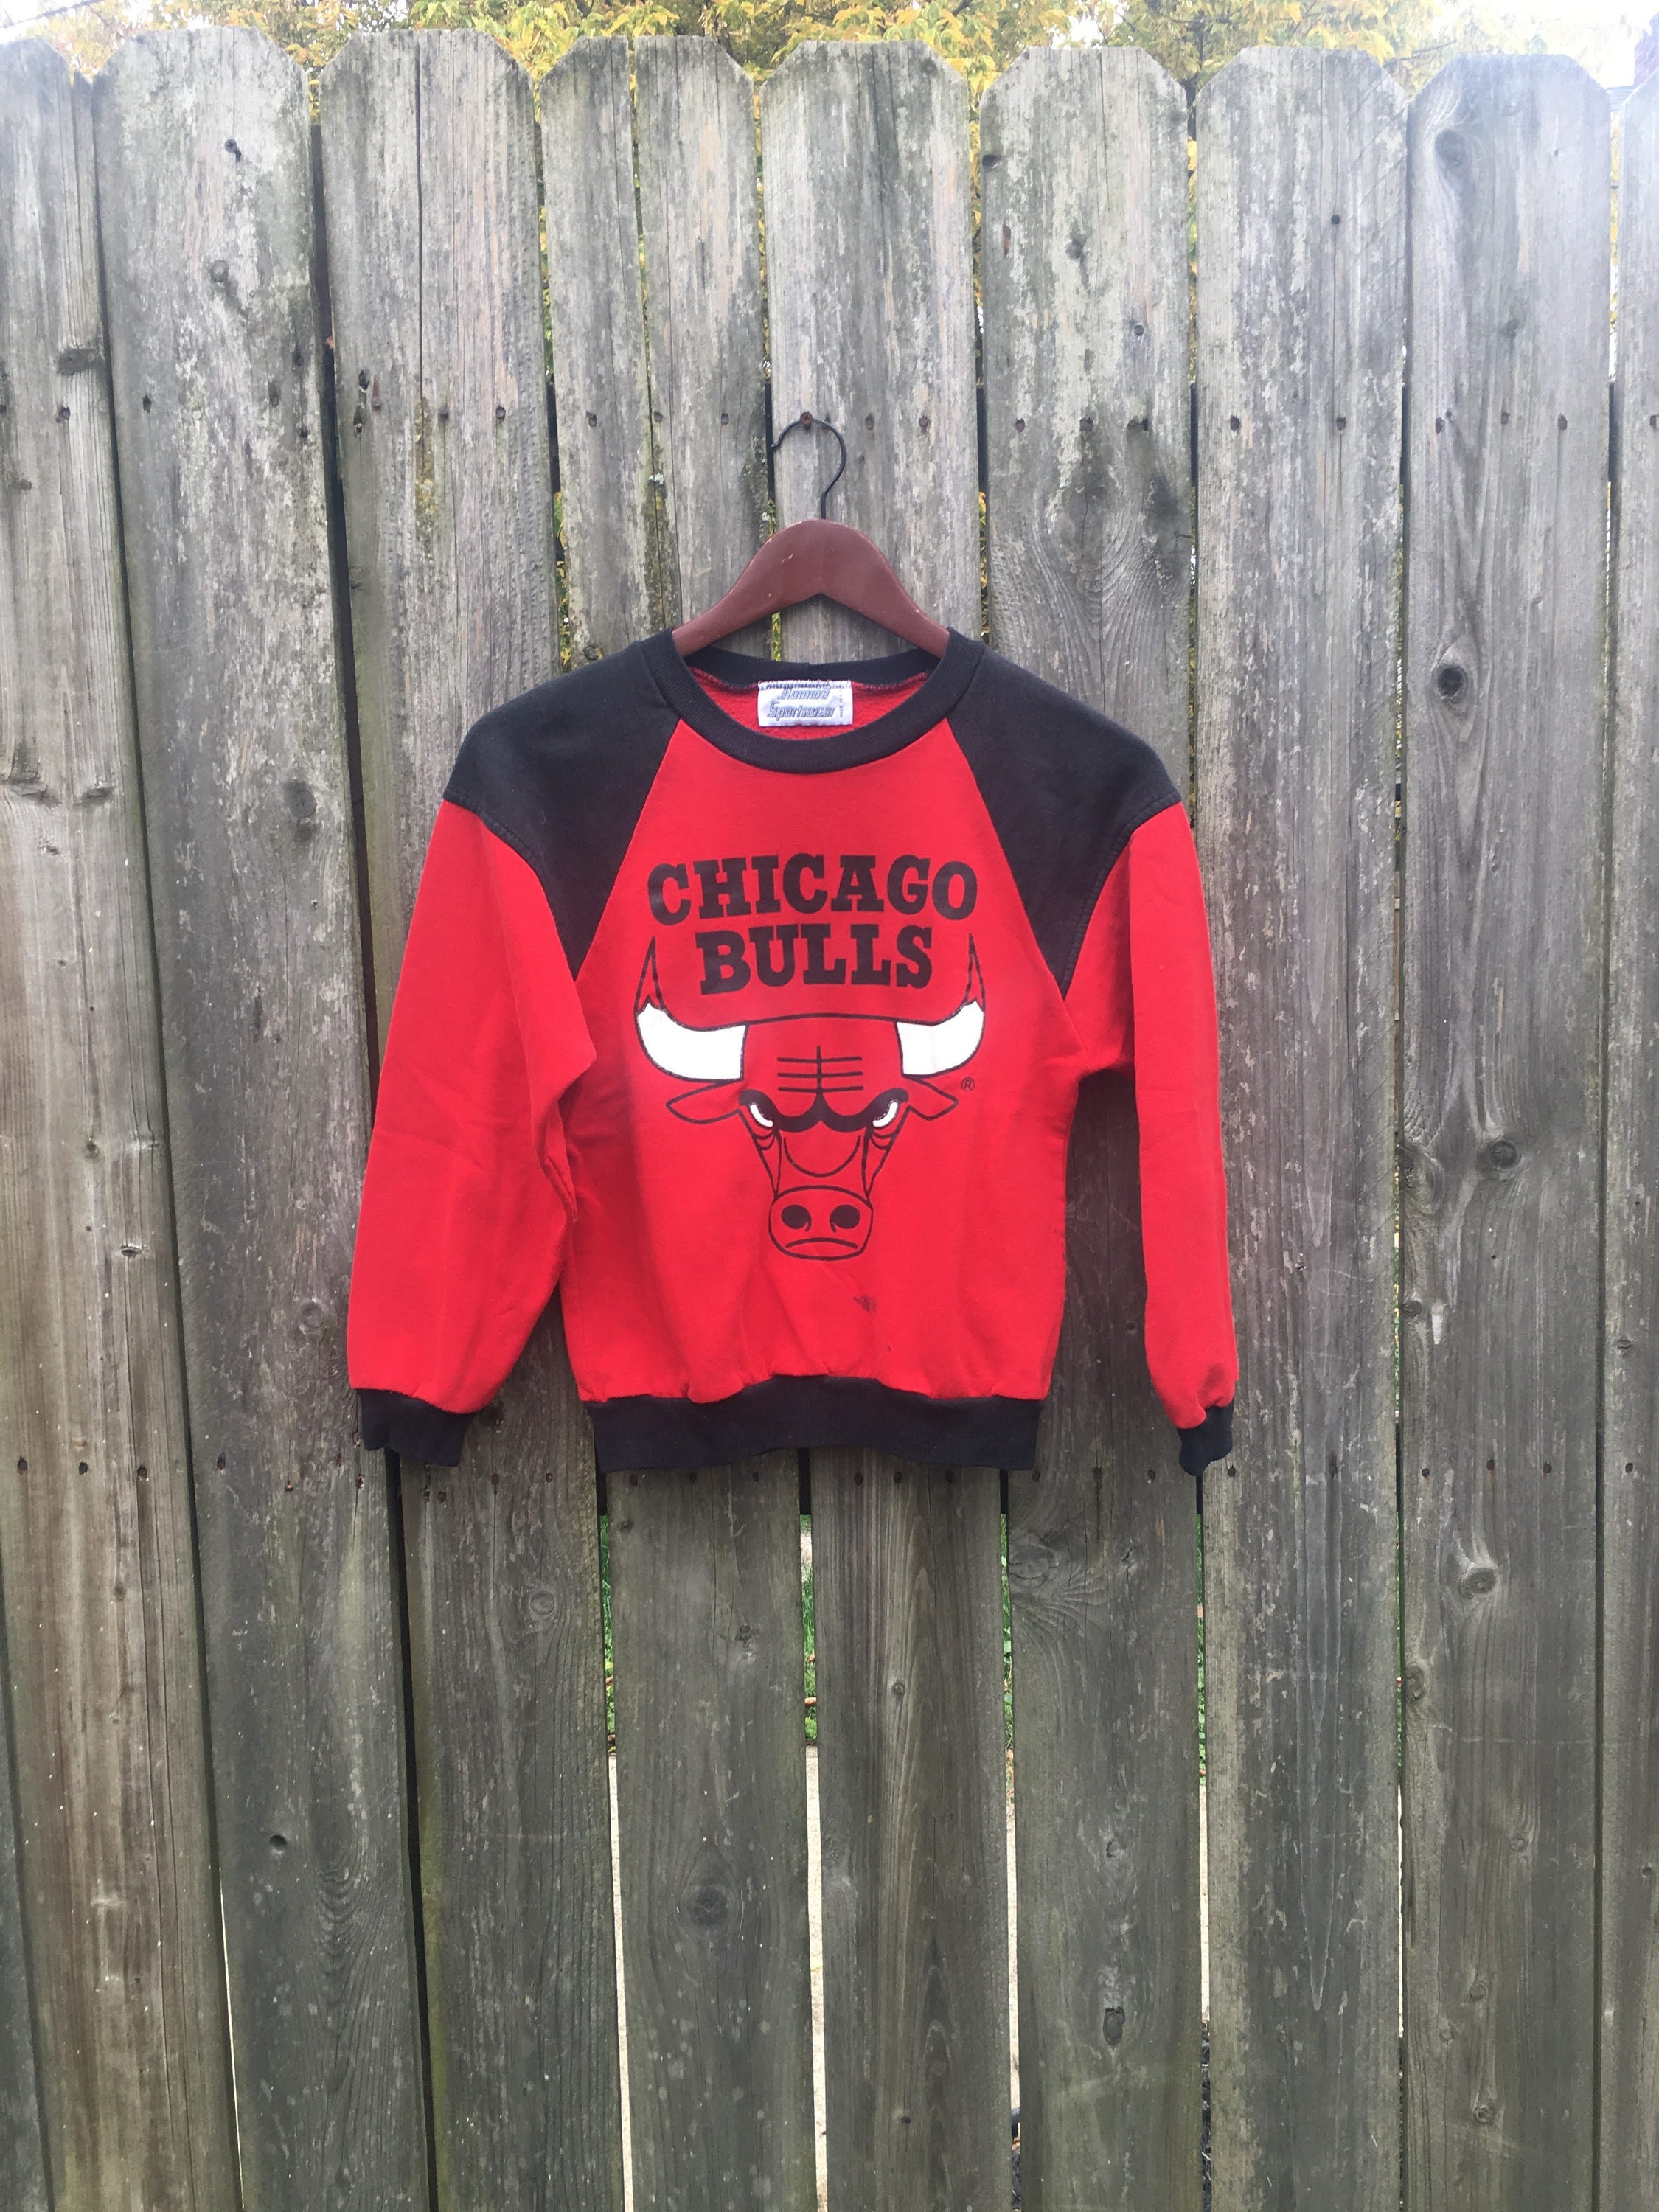 Chicago Bulls Embroidered Sweatshirt - Small – The Vintage Store